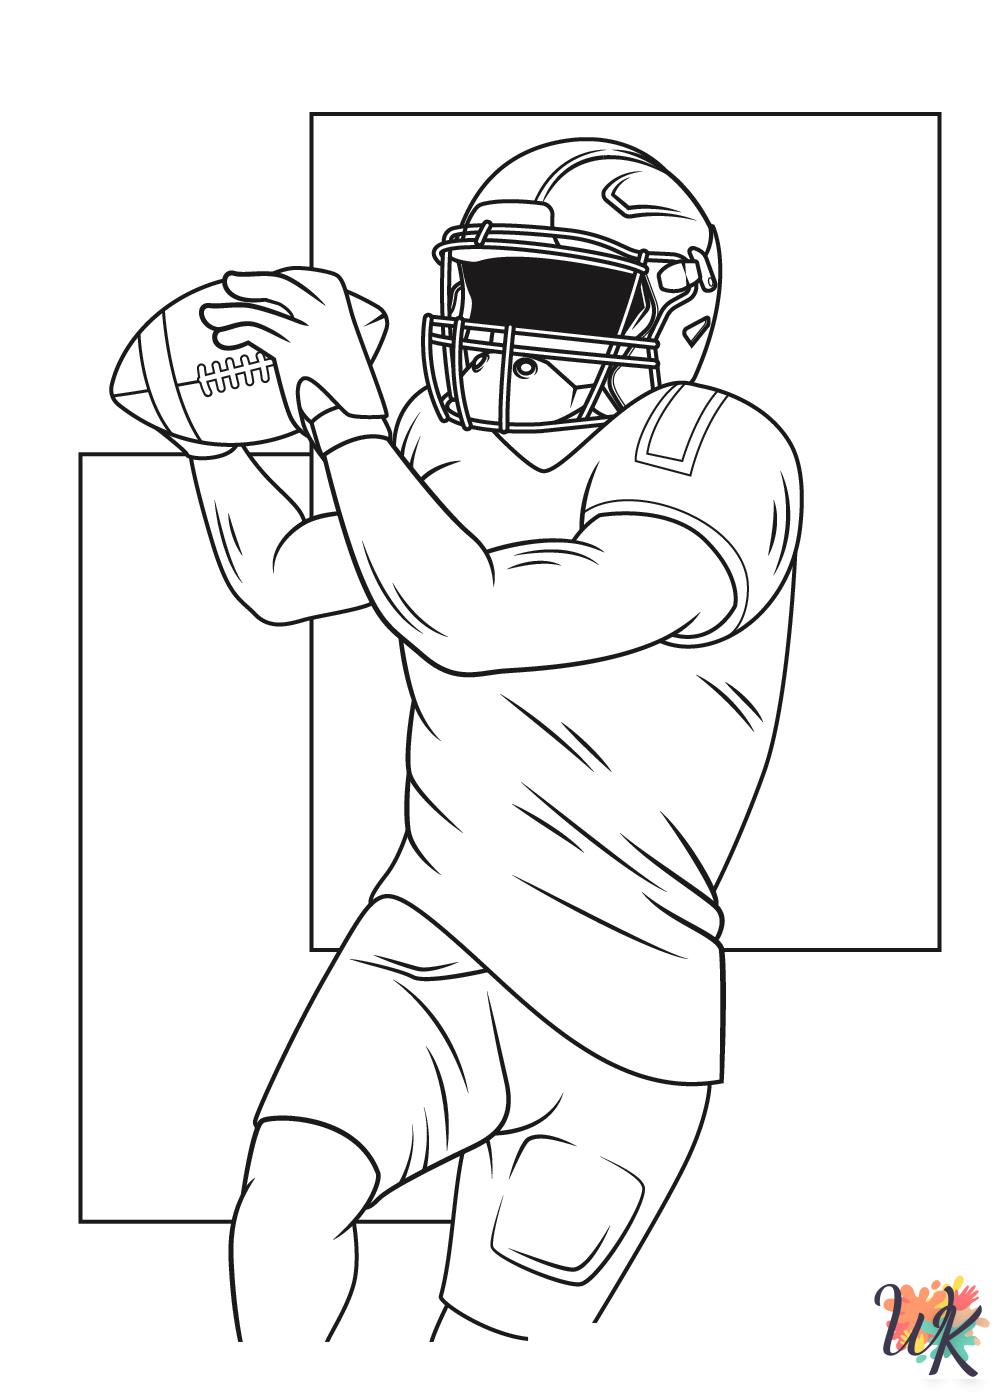 NFL Coloring Pages 6